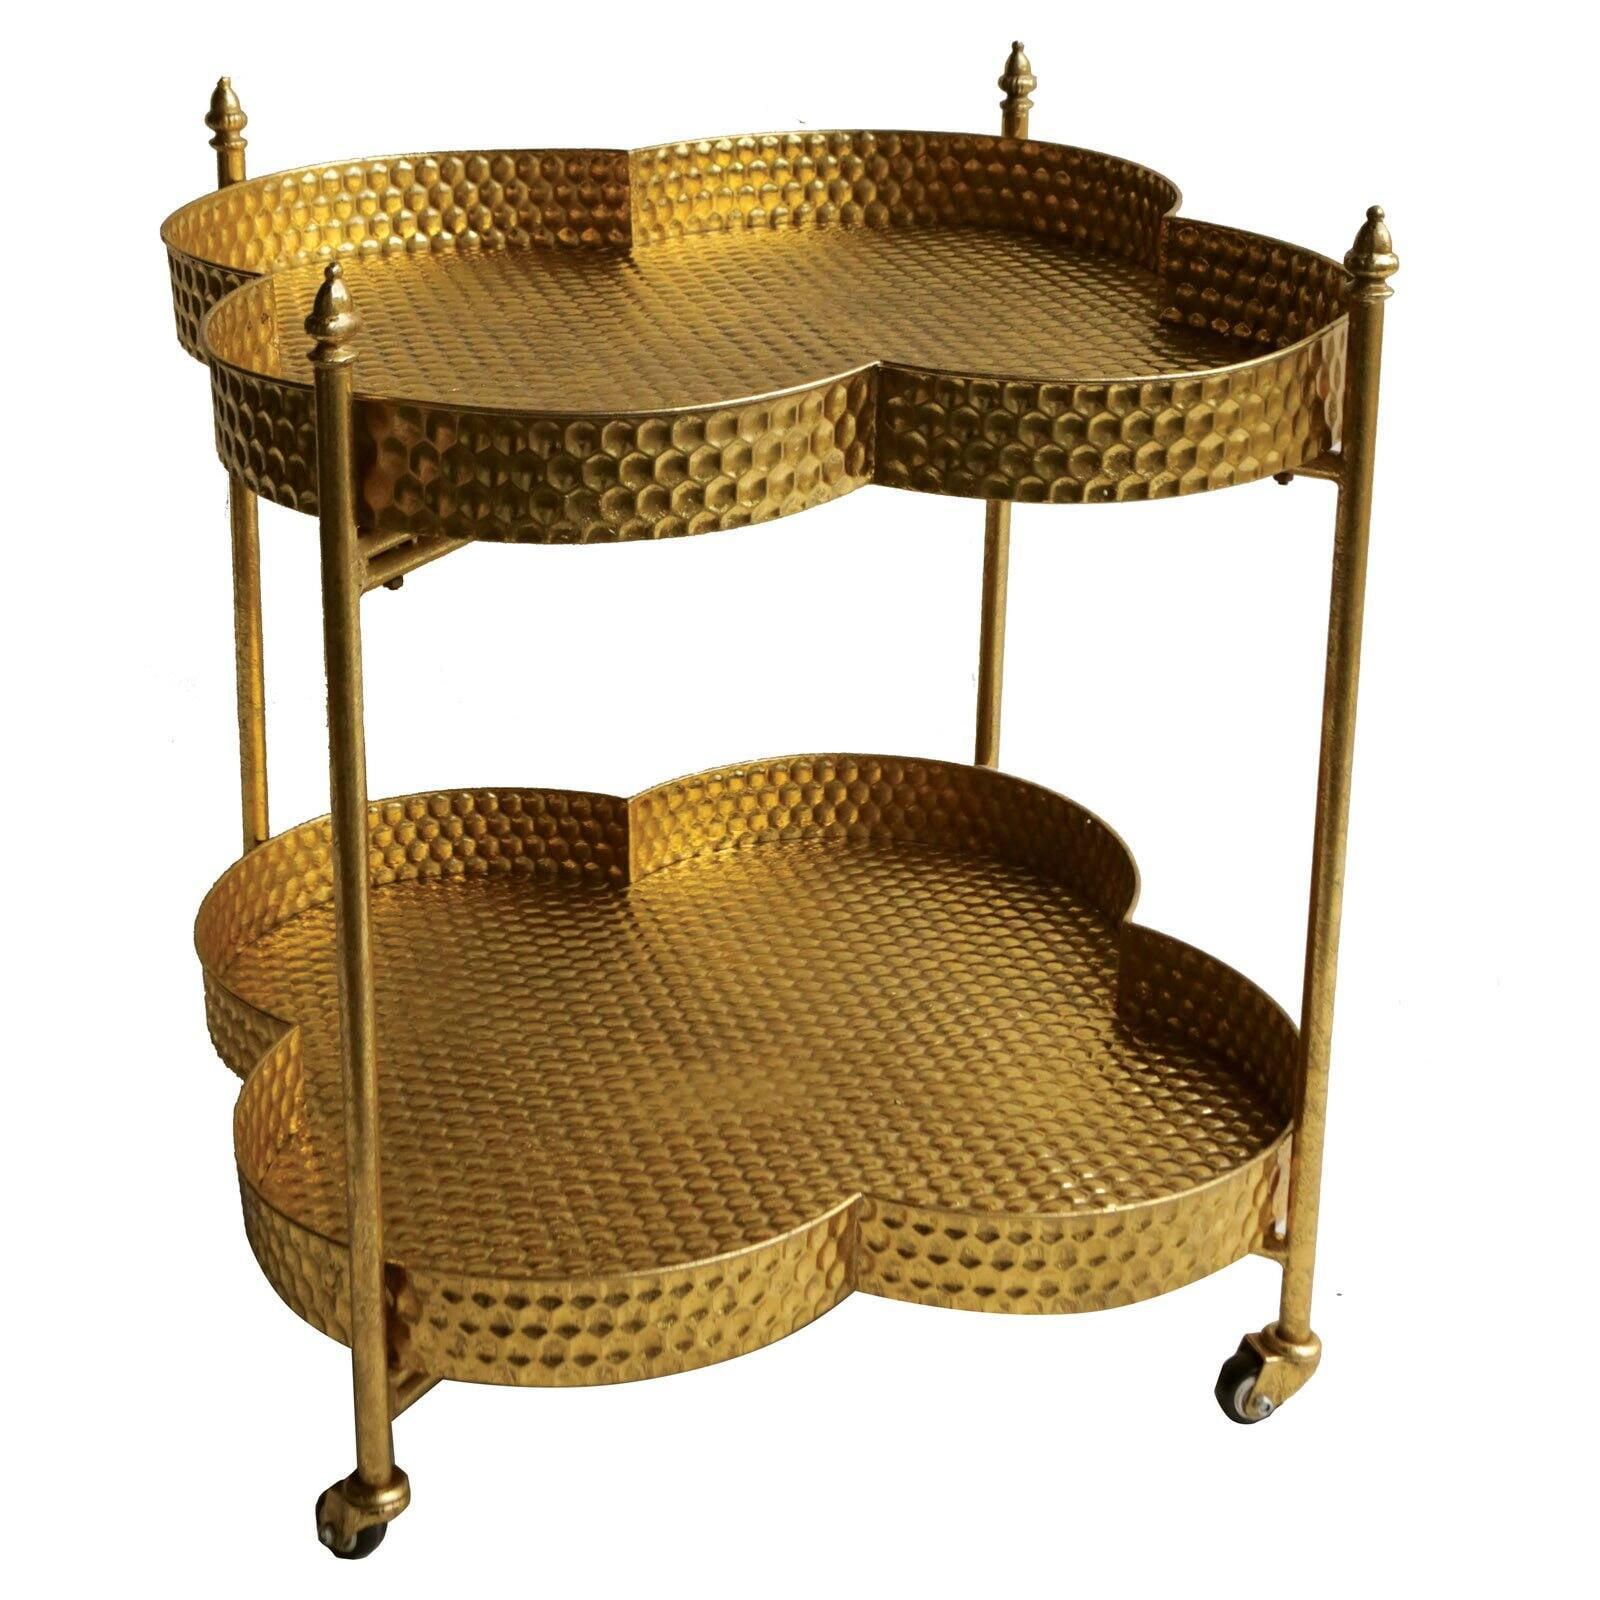 Contemporary Gold Iron Tiered Bar Cart with Clover Shelves